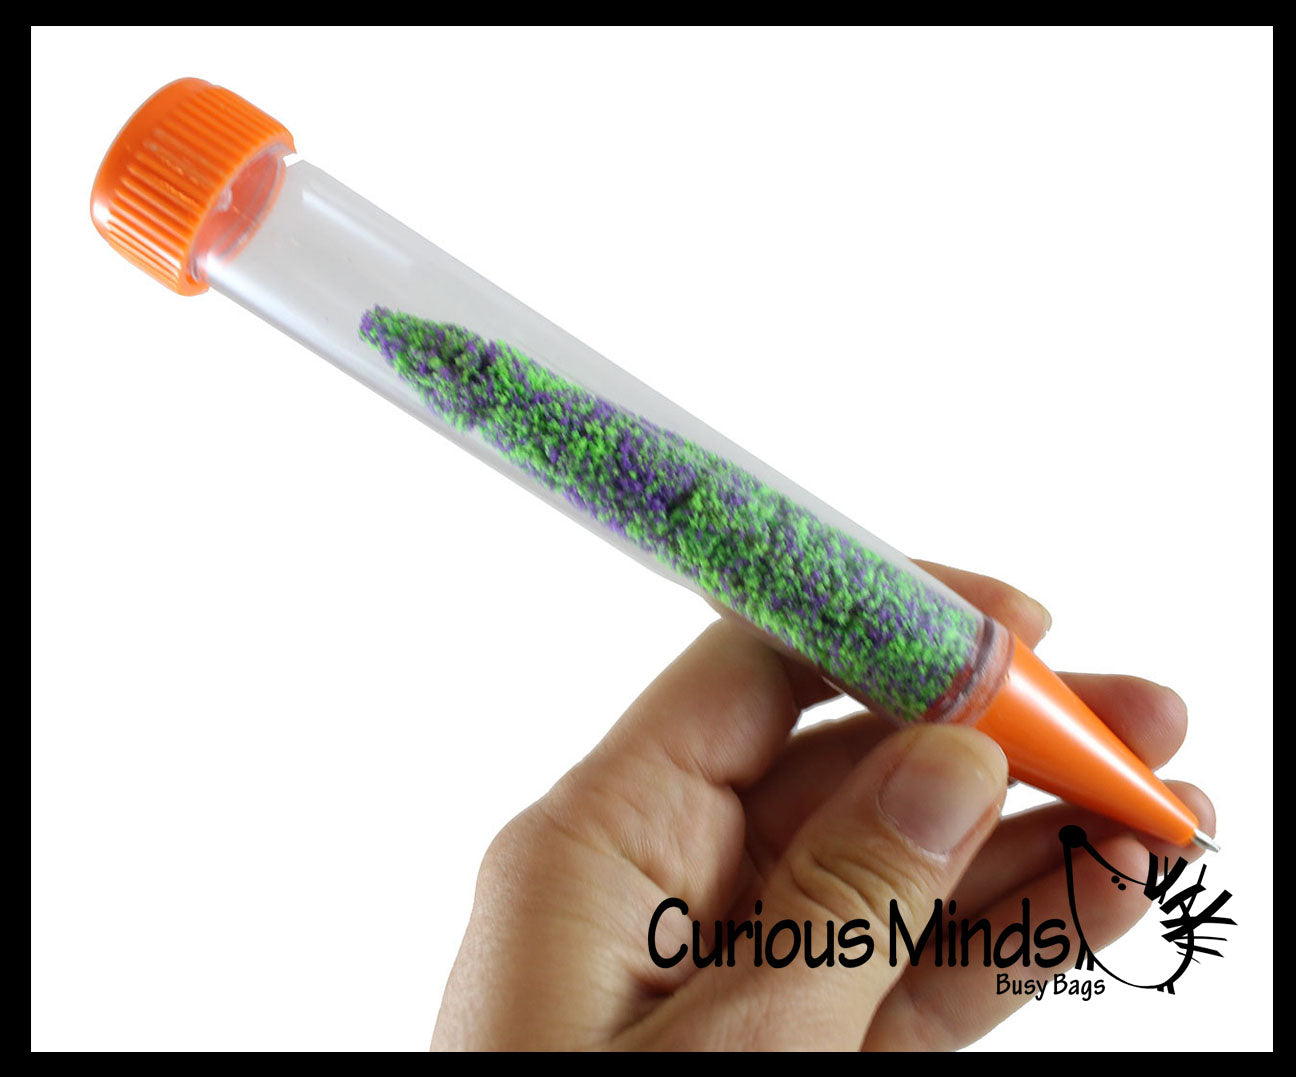 Flowing Foam Motion Pen - Filled with Moving Foam - Soothing and Calming Motion Pen - Liquid Timer Sensory Office Toy - Visual Stimulation